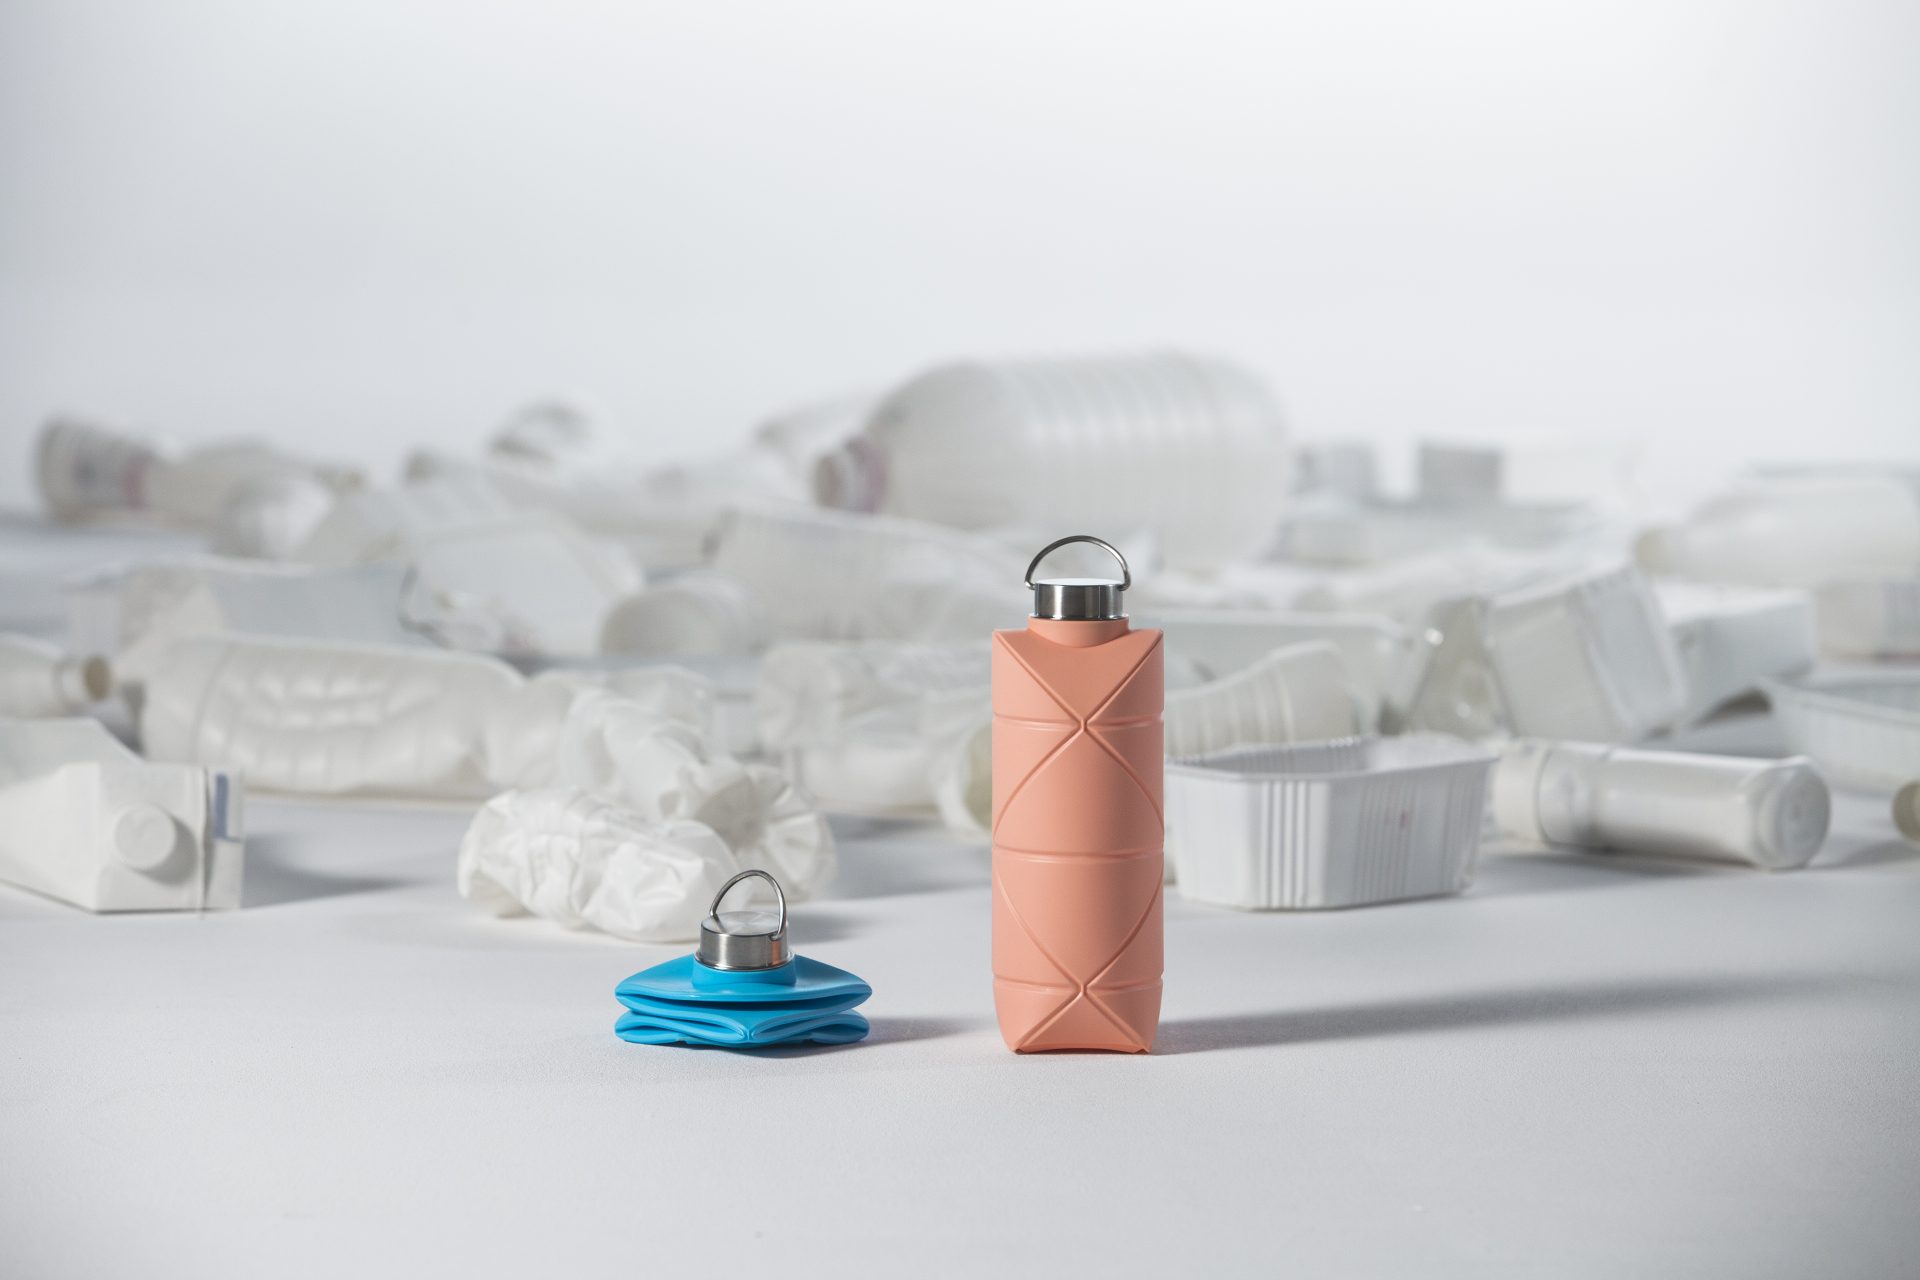 DiFOLD designs the collapsible and reusable 'origami bottle